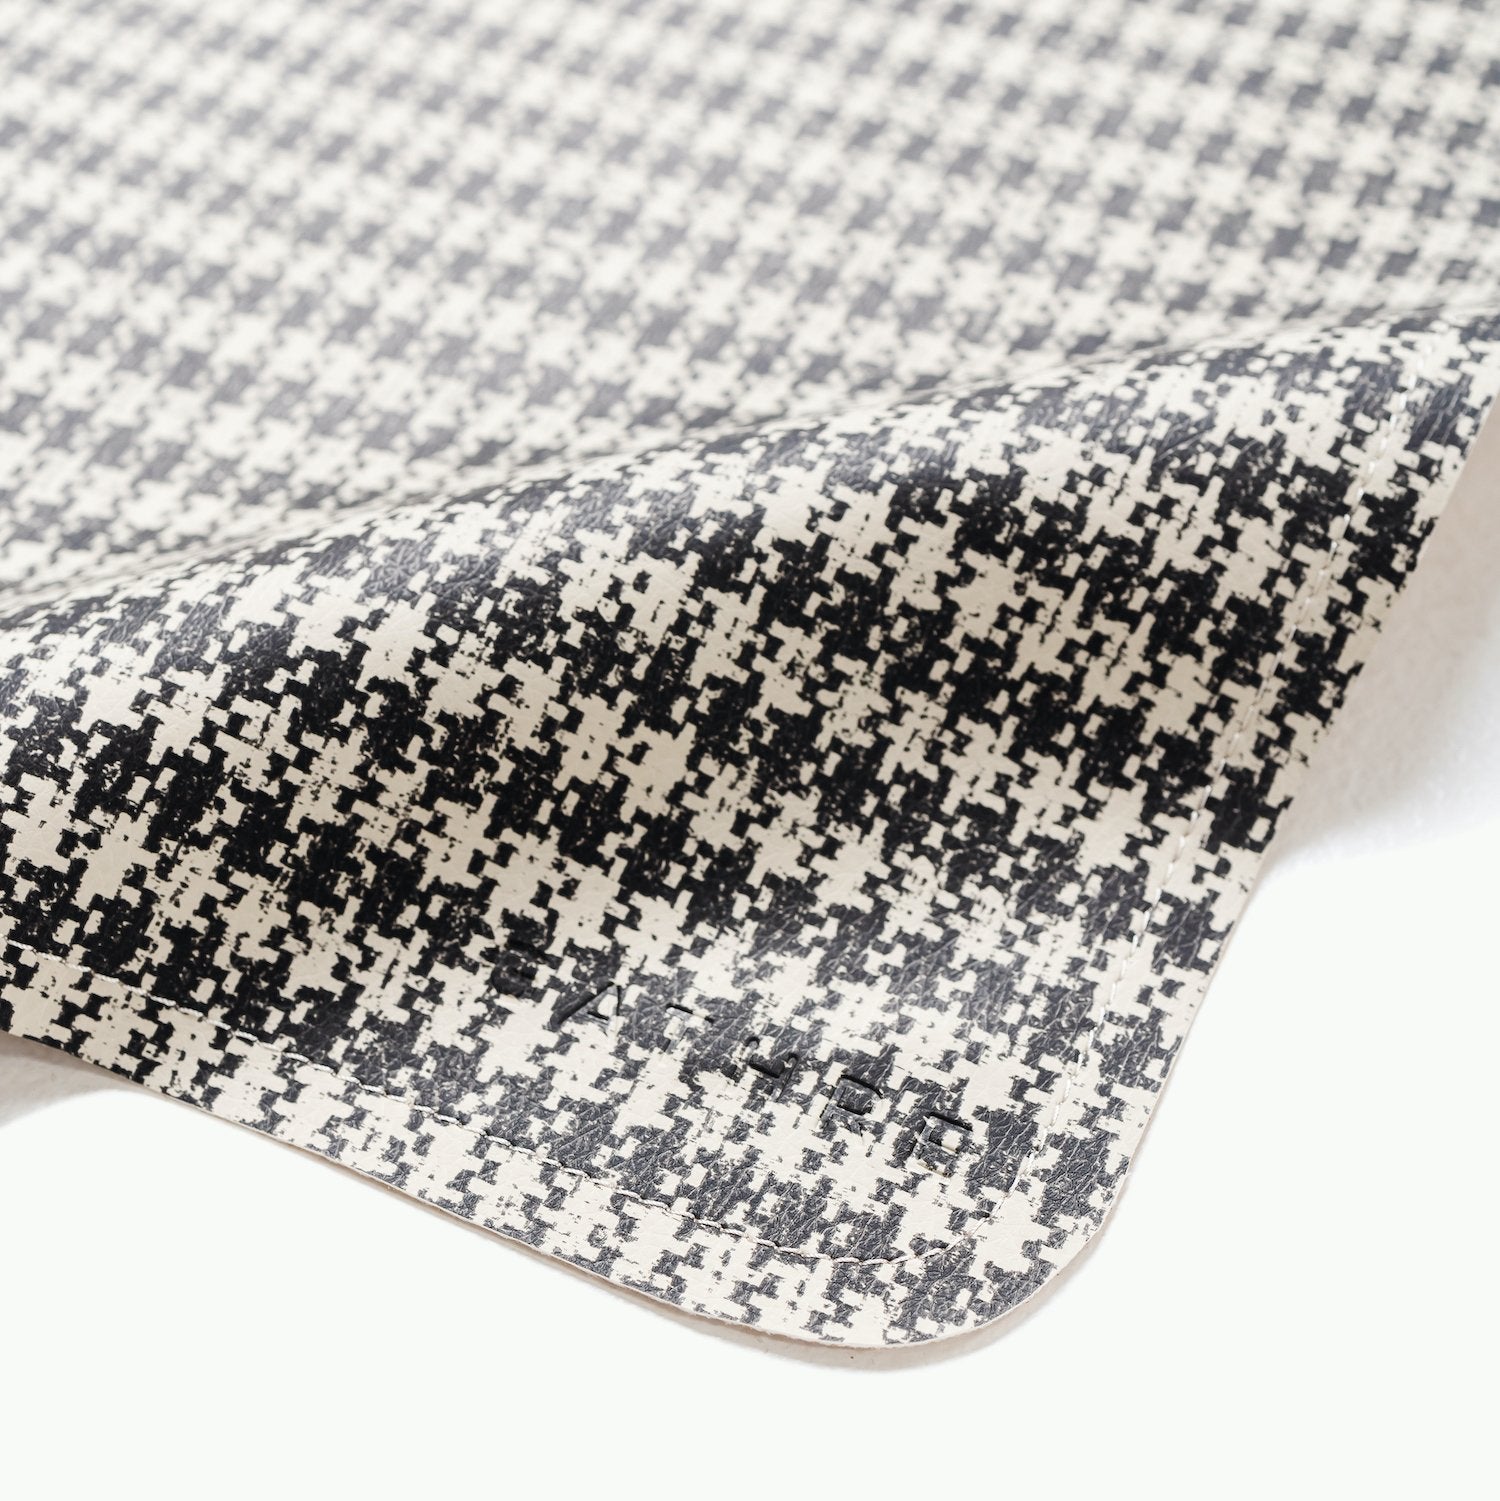 Houndstooth (on sale)@gathre deboss on the houndstooth micro+ mat